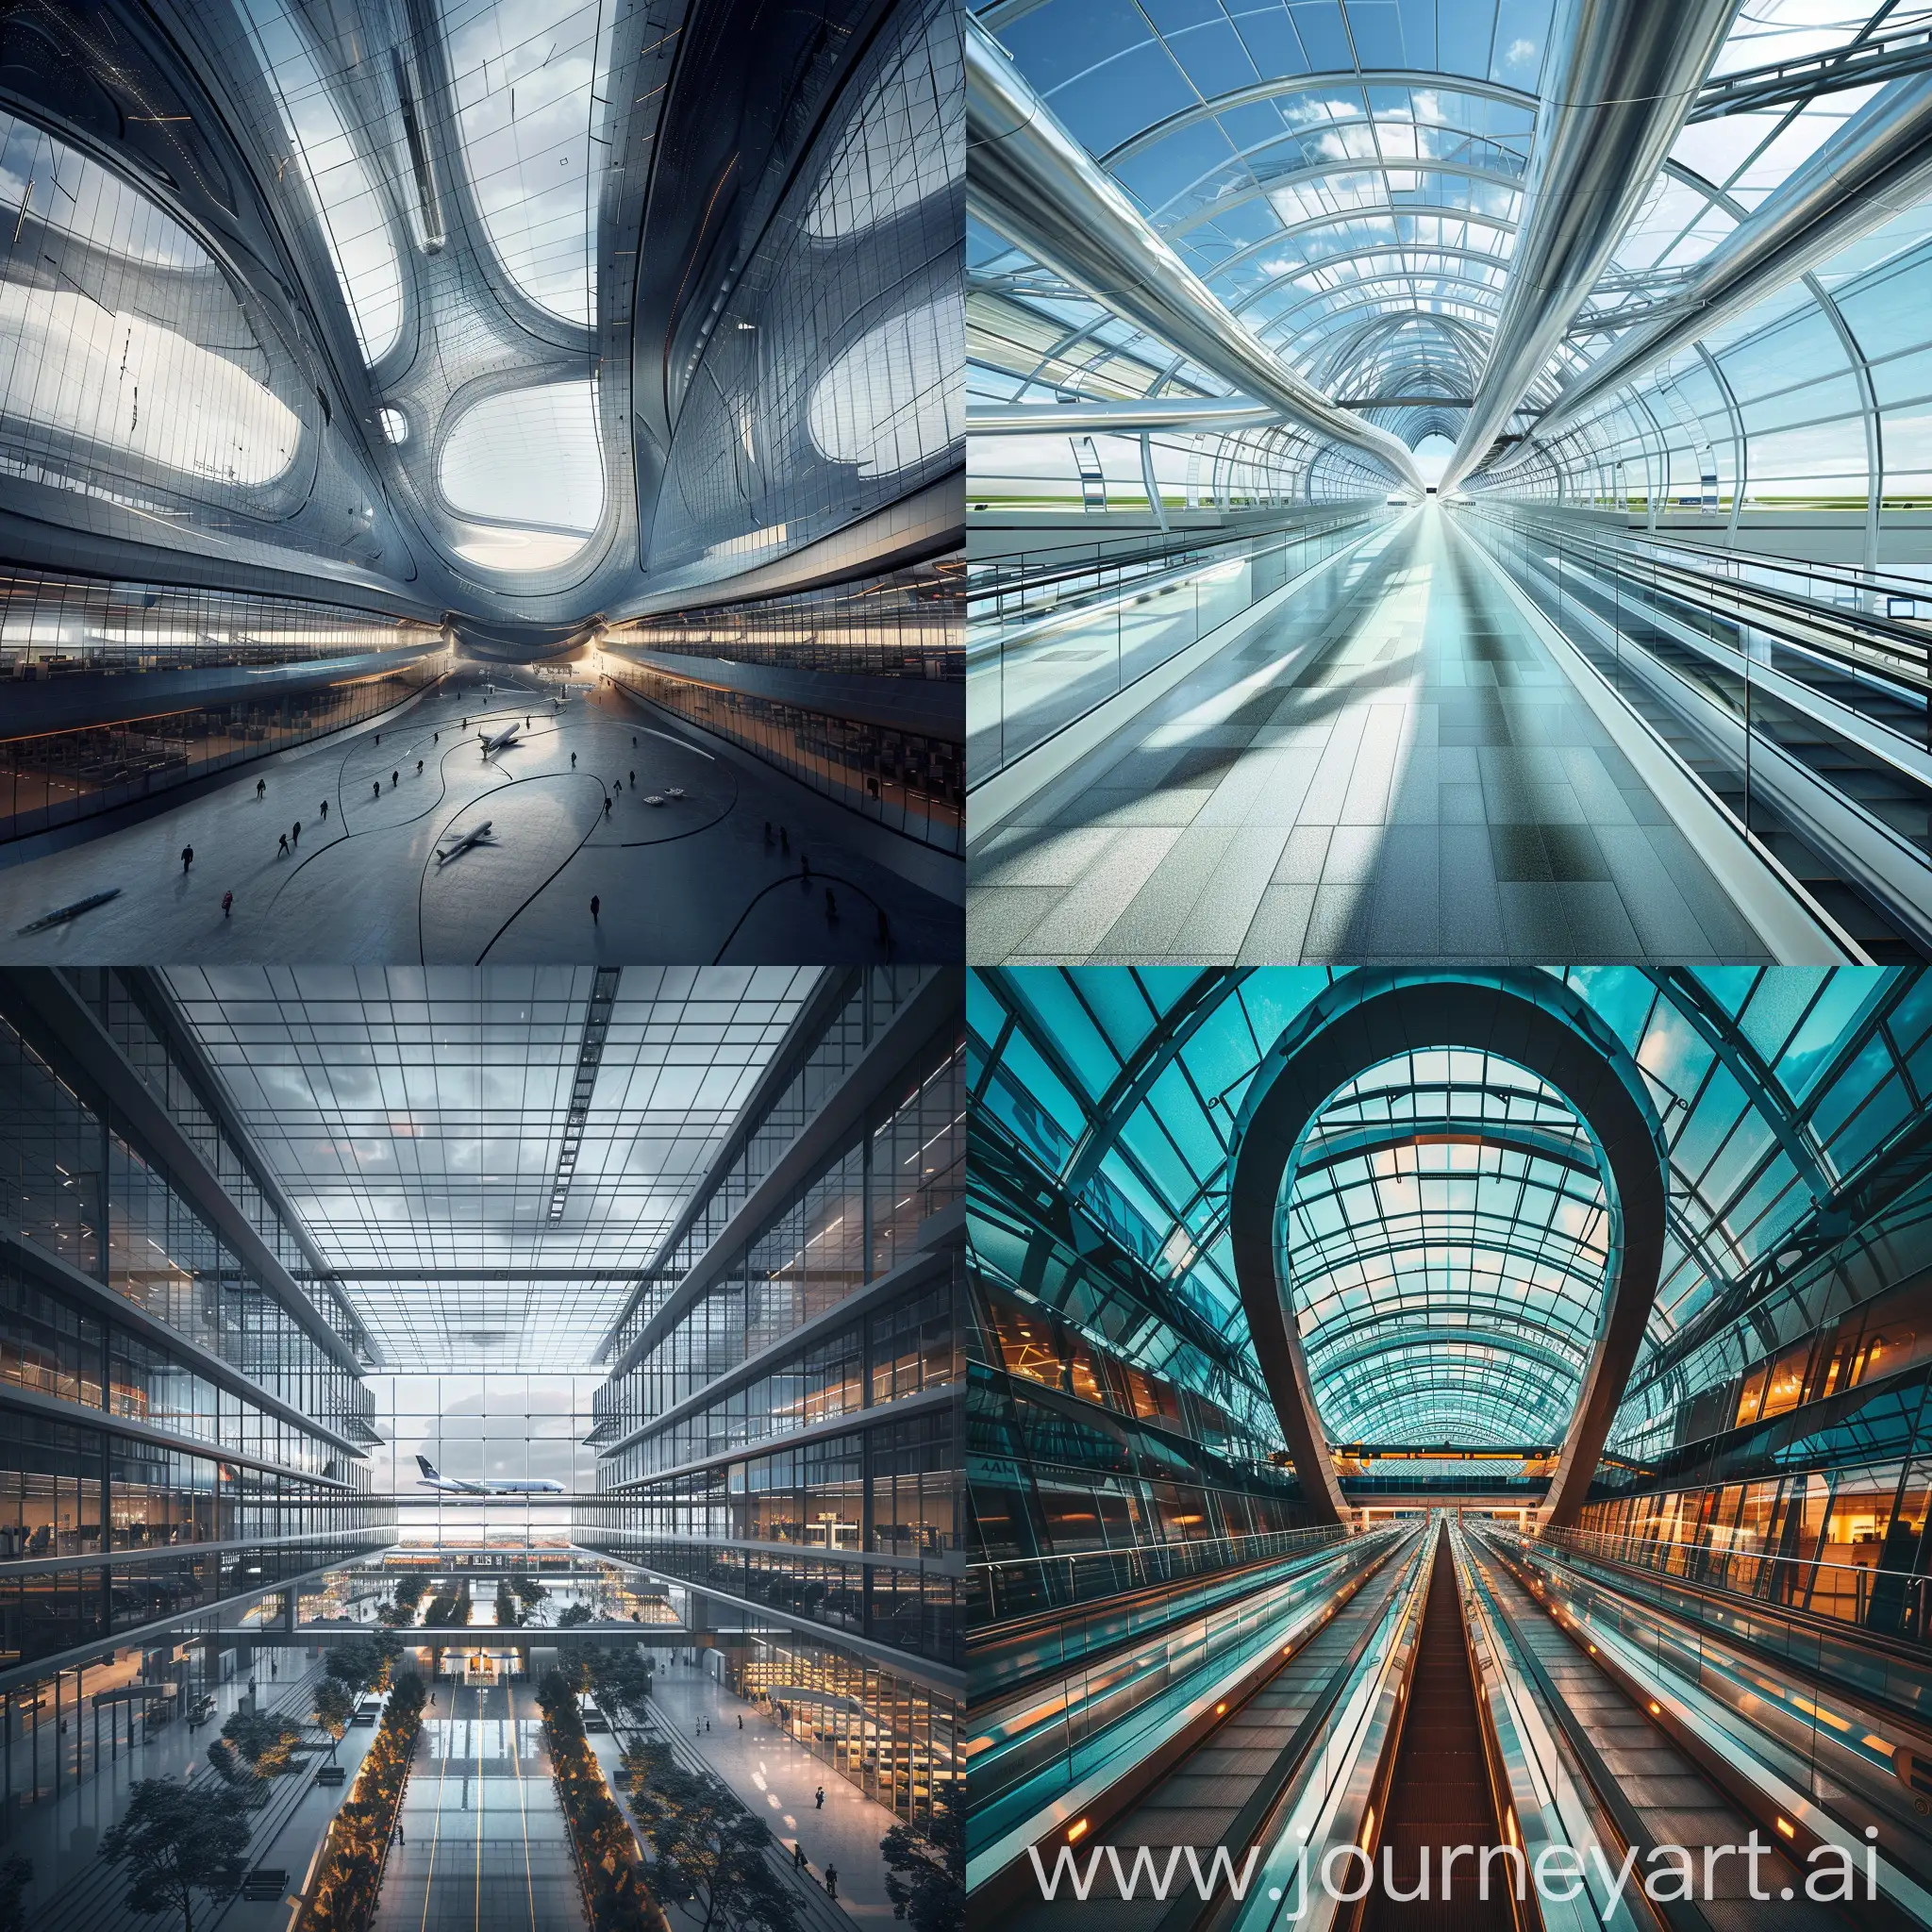 In the heart of the bustling metropolis, where the sky meets the earth, lies the Terminal Nexus International Airport. Its architecture is a symphony of steel, glass, and concrete, harmonizing the practicality of transit with the poetry of travel